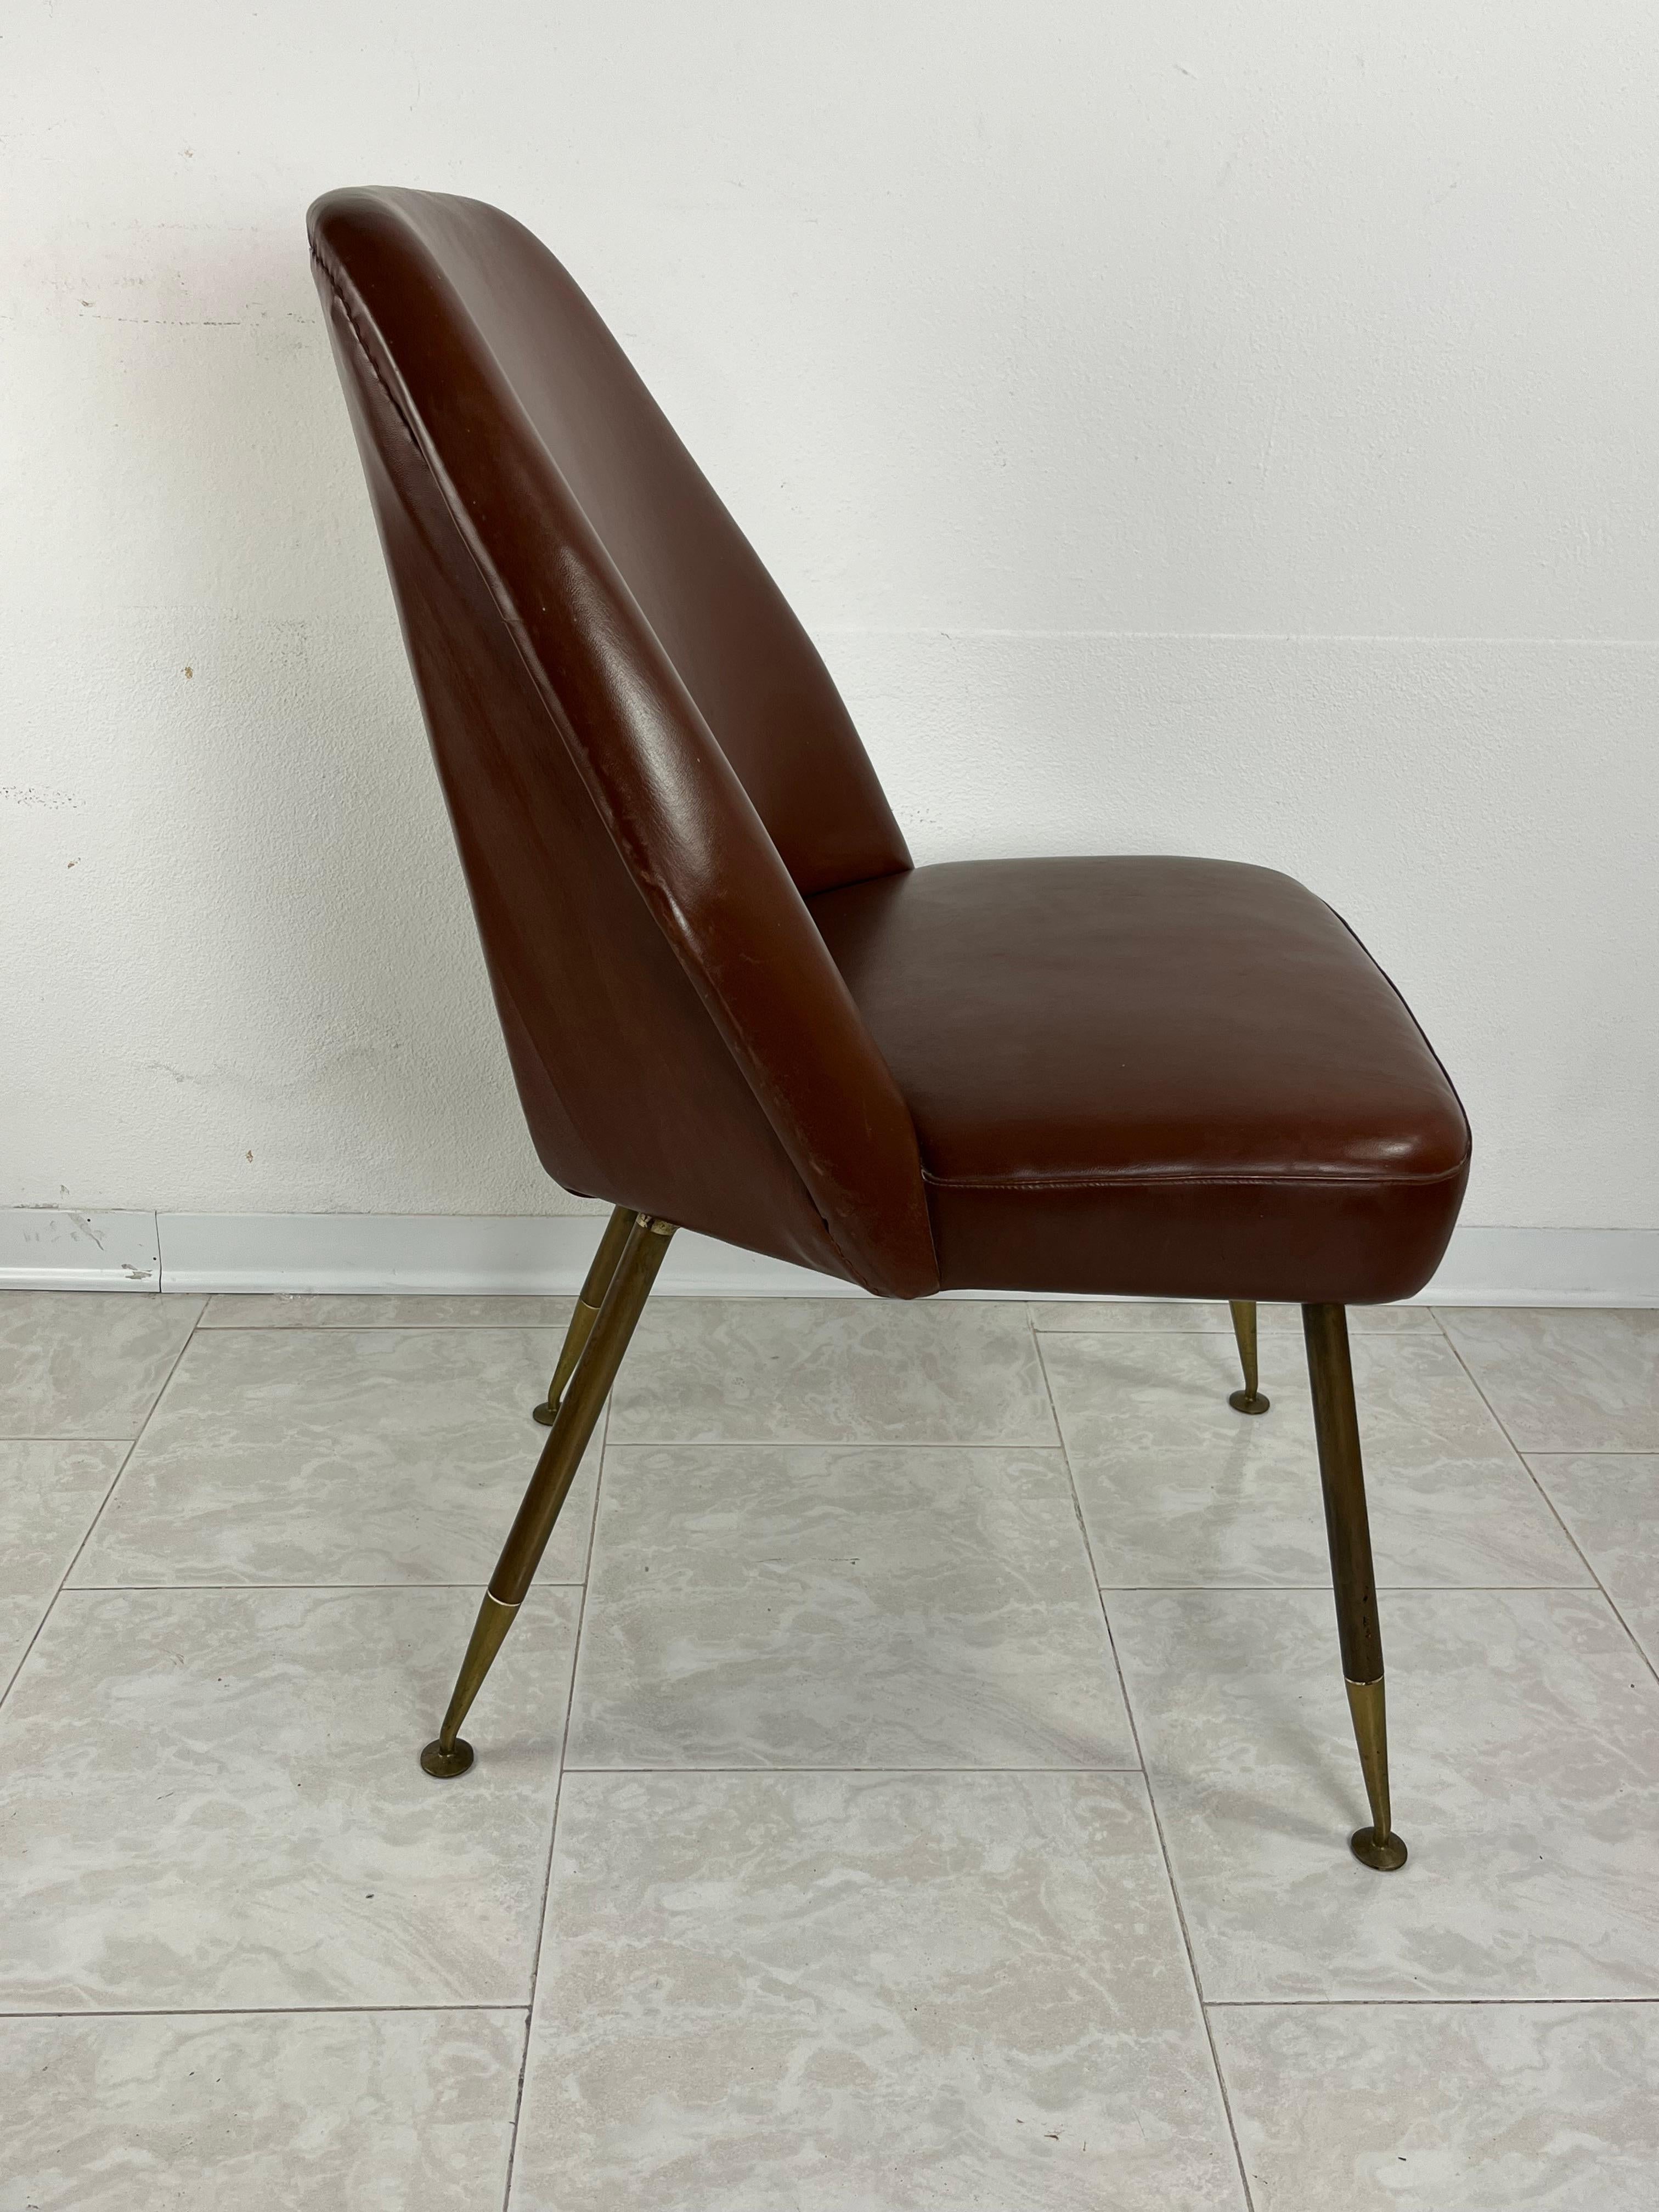 Mid-20th Century Mid-Century Campanula Model Chair By Carlo Pagani For Arflex 1952 For Sale